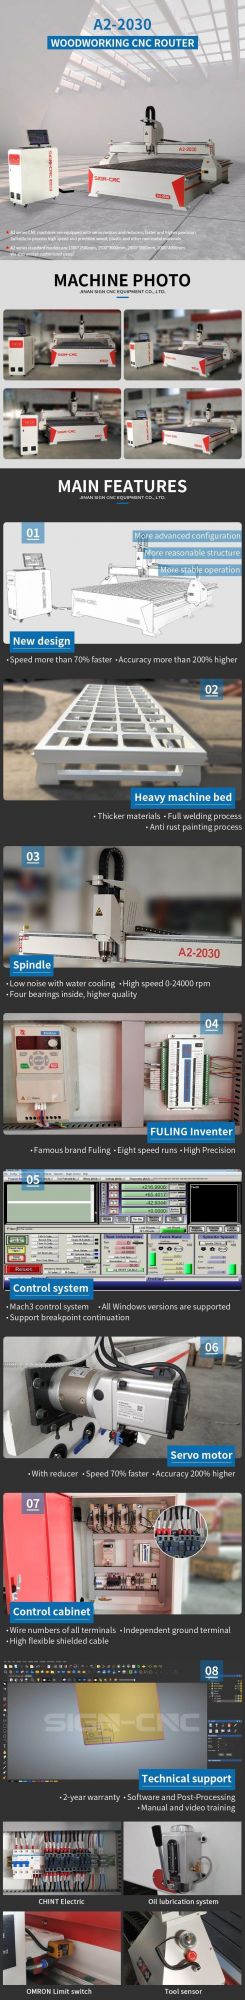 Discount! ! Sign A2-2030 CNC Wood Router Machine for Woodworking